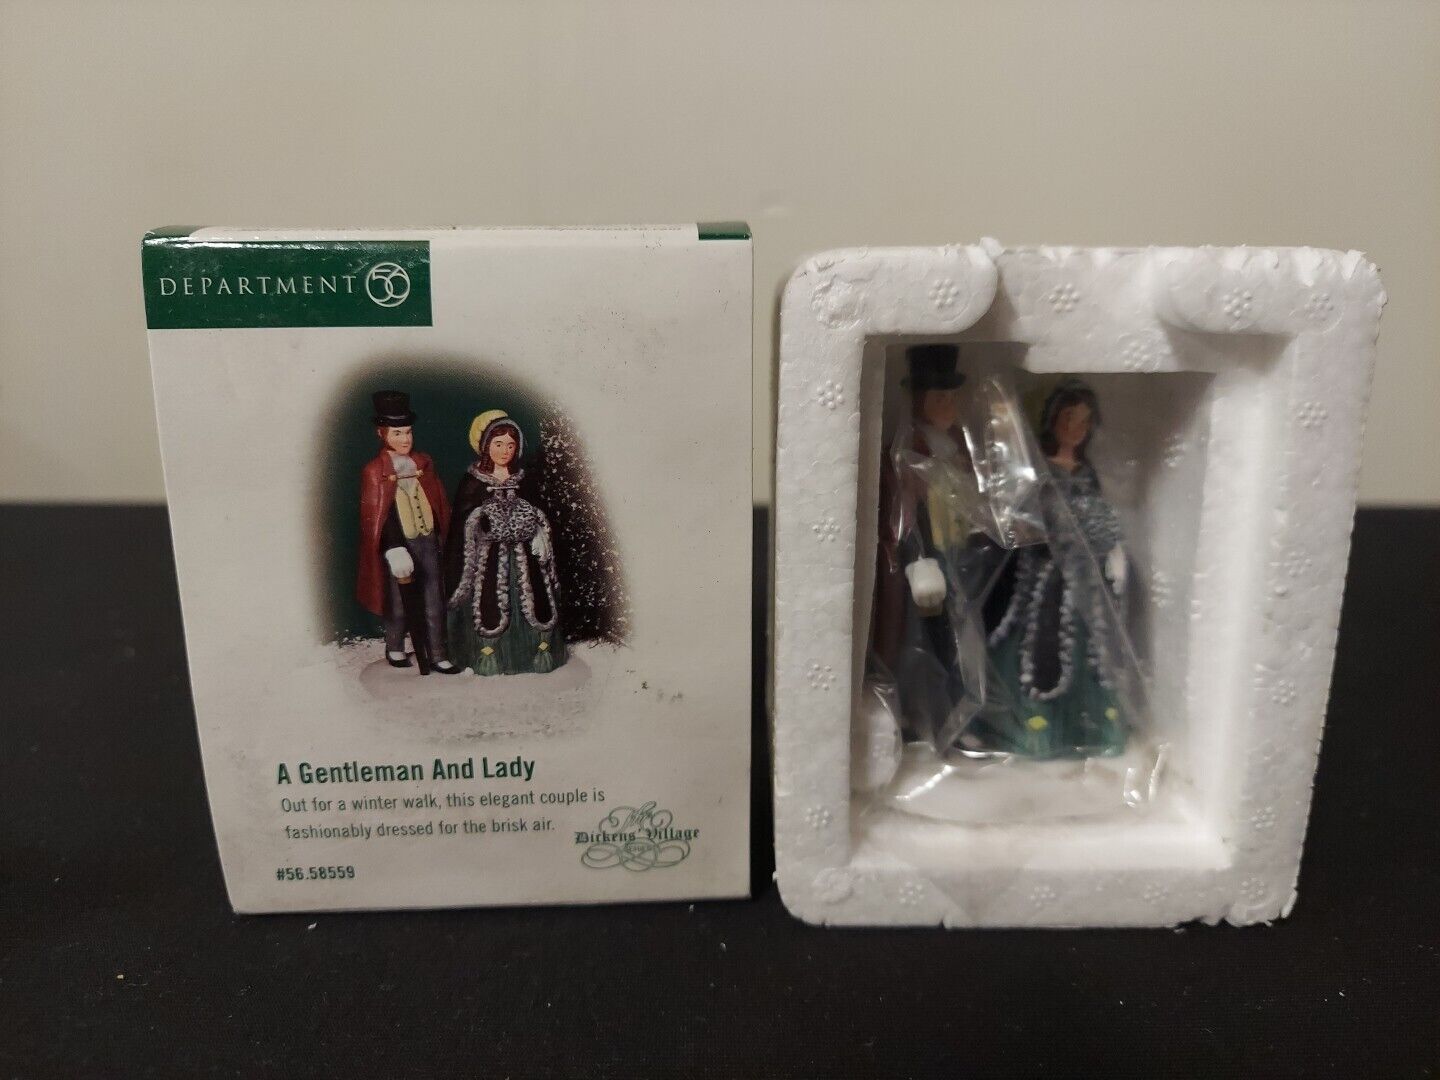 Department 56 Dicken\'s Village 58559 Christmas Accessory A Gentleman And Lady